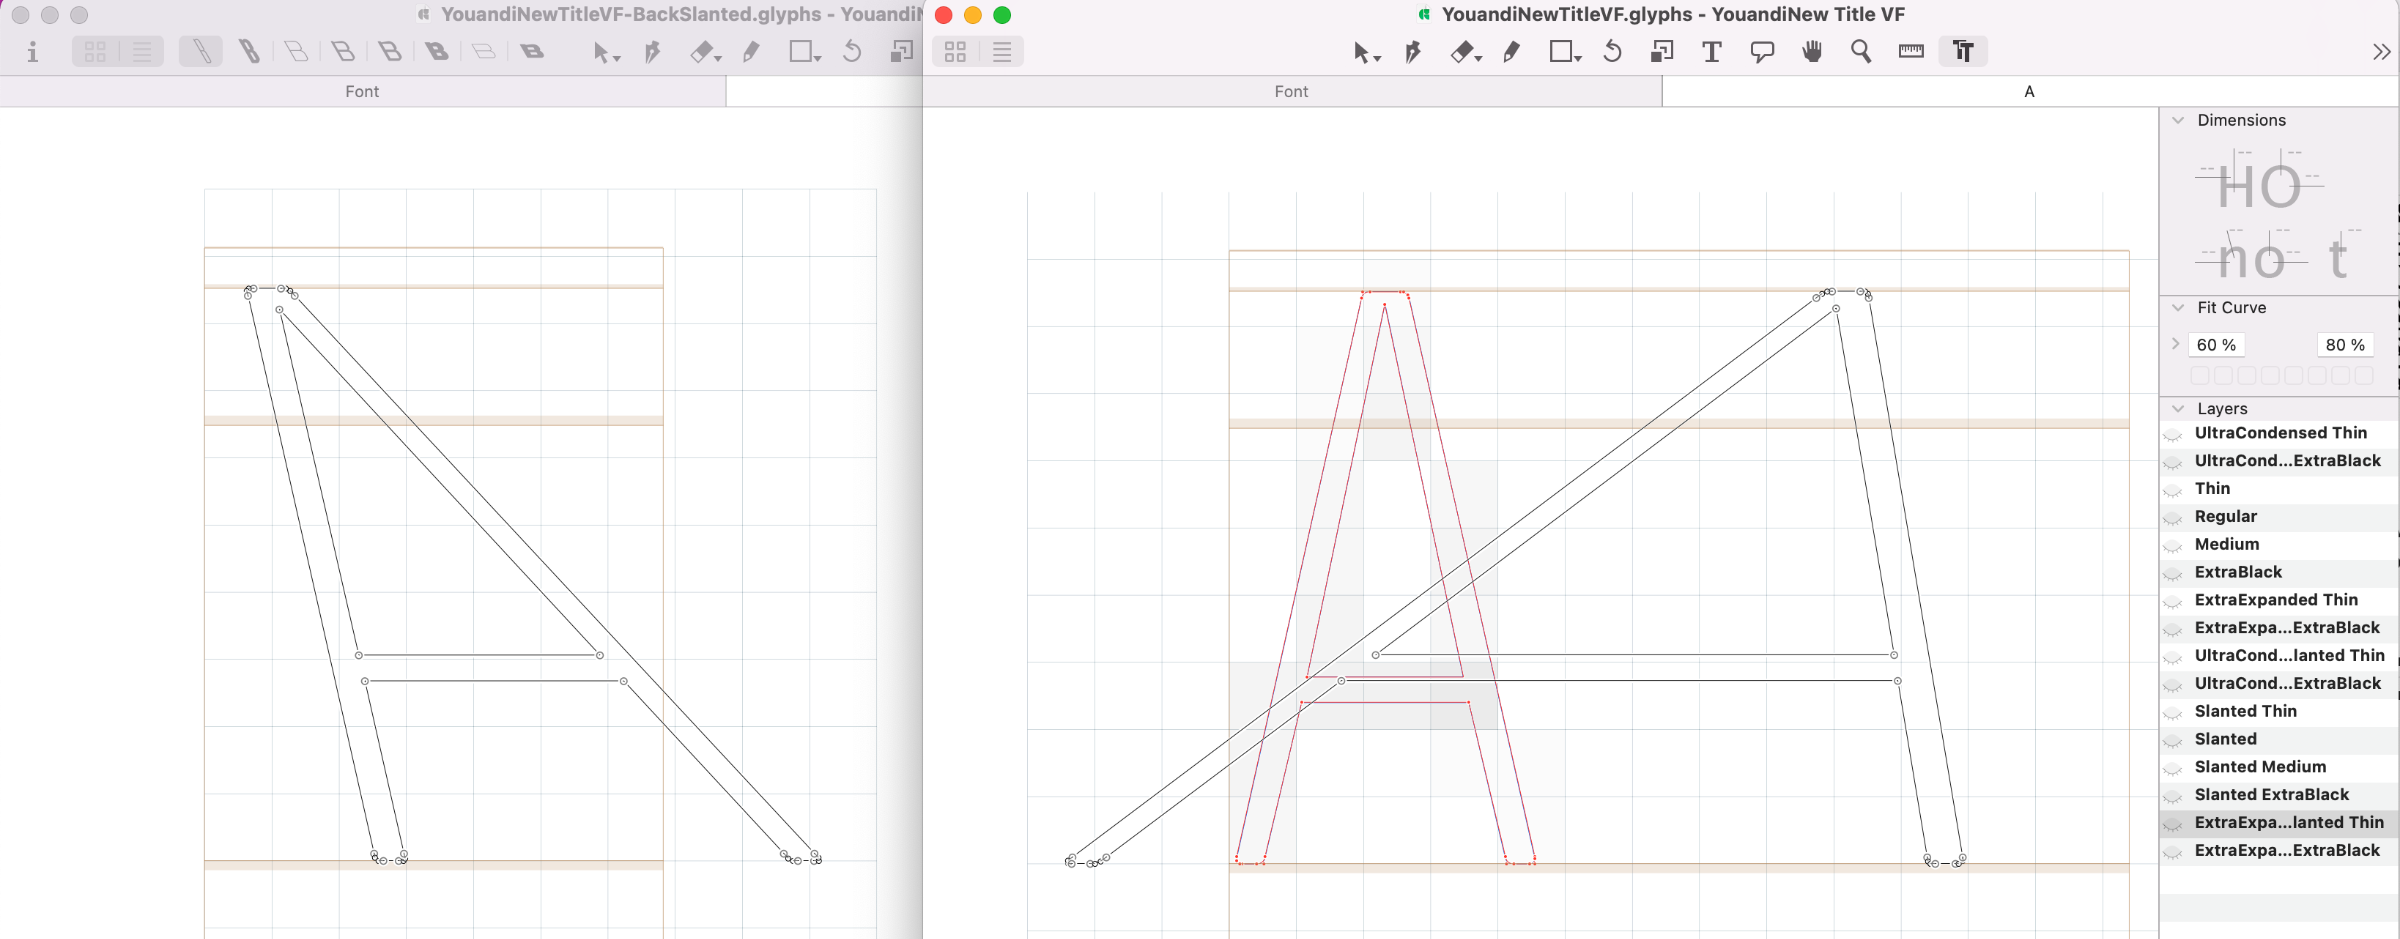 The corresponding slant extremes using the example of the letter A in the GlyphsApp